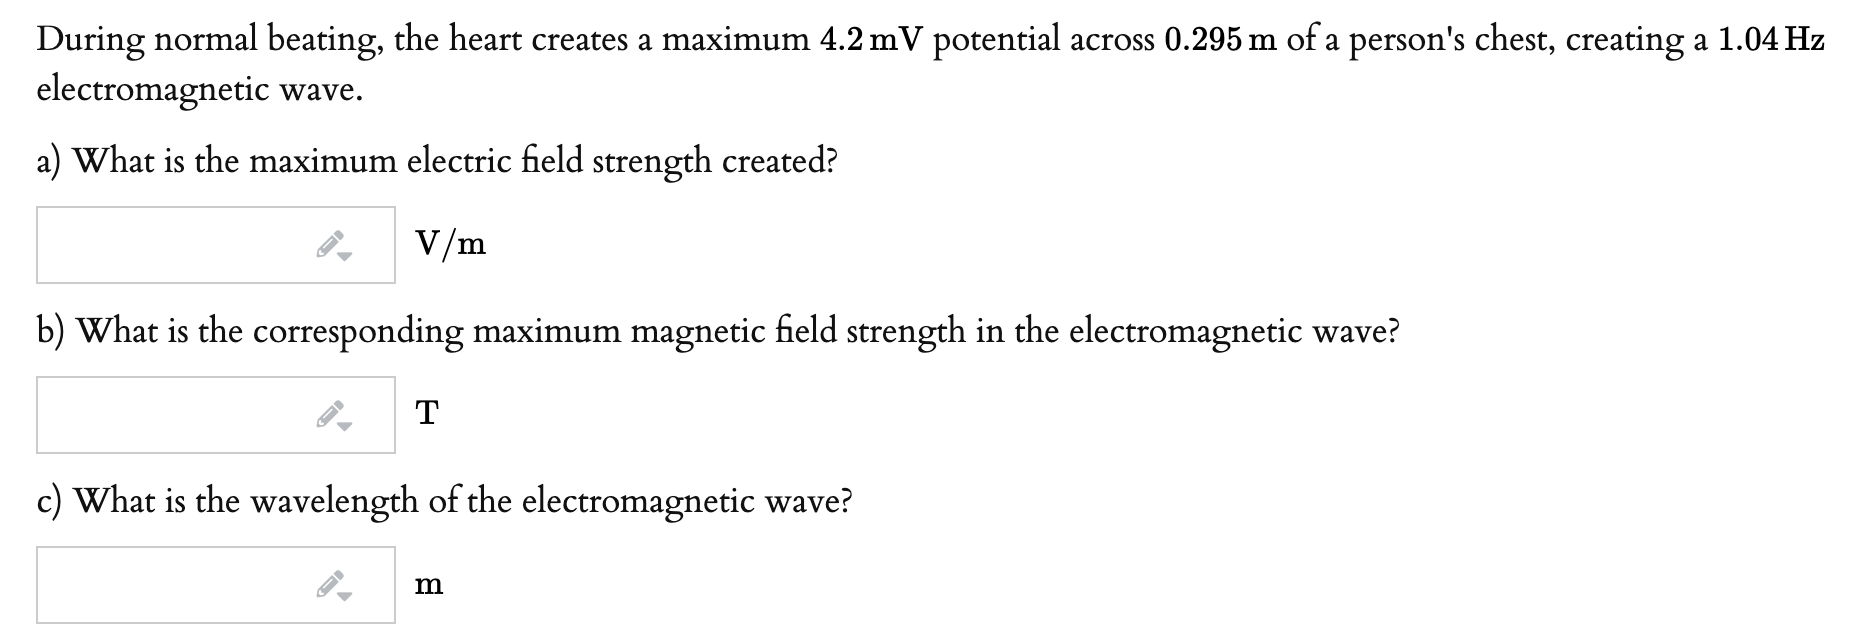 During normal beating, the heart creates a maximum 4.2 mV potential across 0.295 m of a person's chest, creating a 1.04 Hz
electromagnetic wave.
a) What is the maximum electric field strength created?
V/m
b) What is the corresponding maximum magnetic field strength in the electromagnetic wave?
T
c) What is the wavelength of the electromagnetic wave?
m
